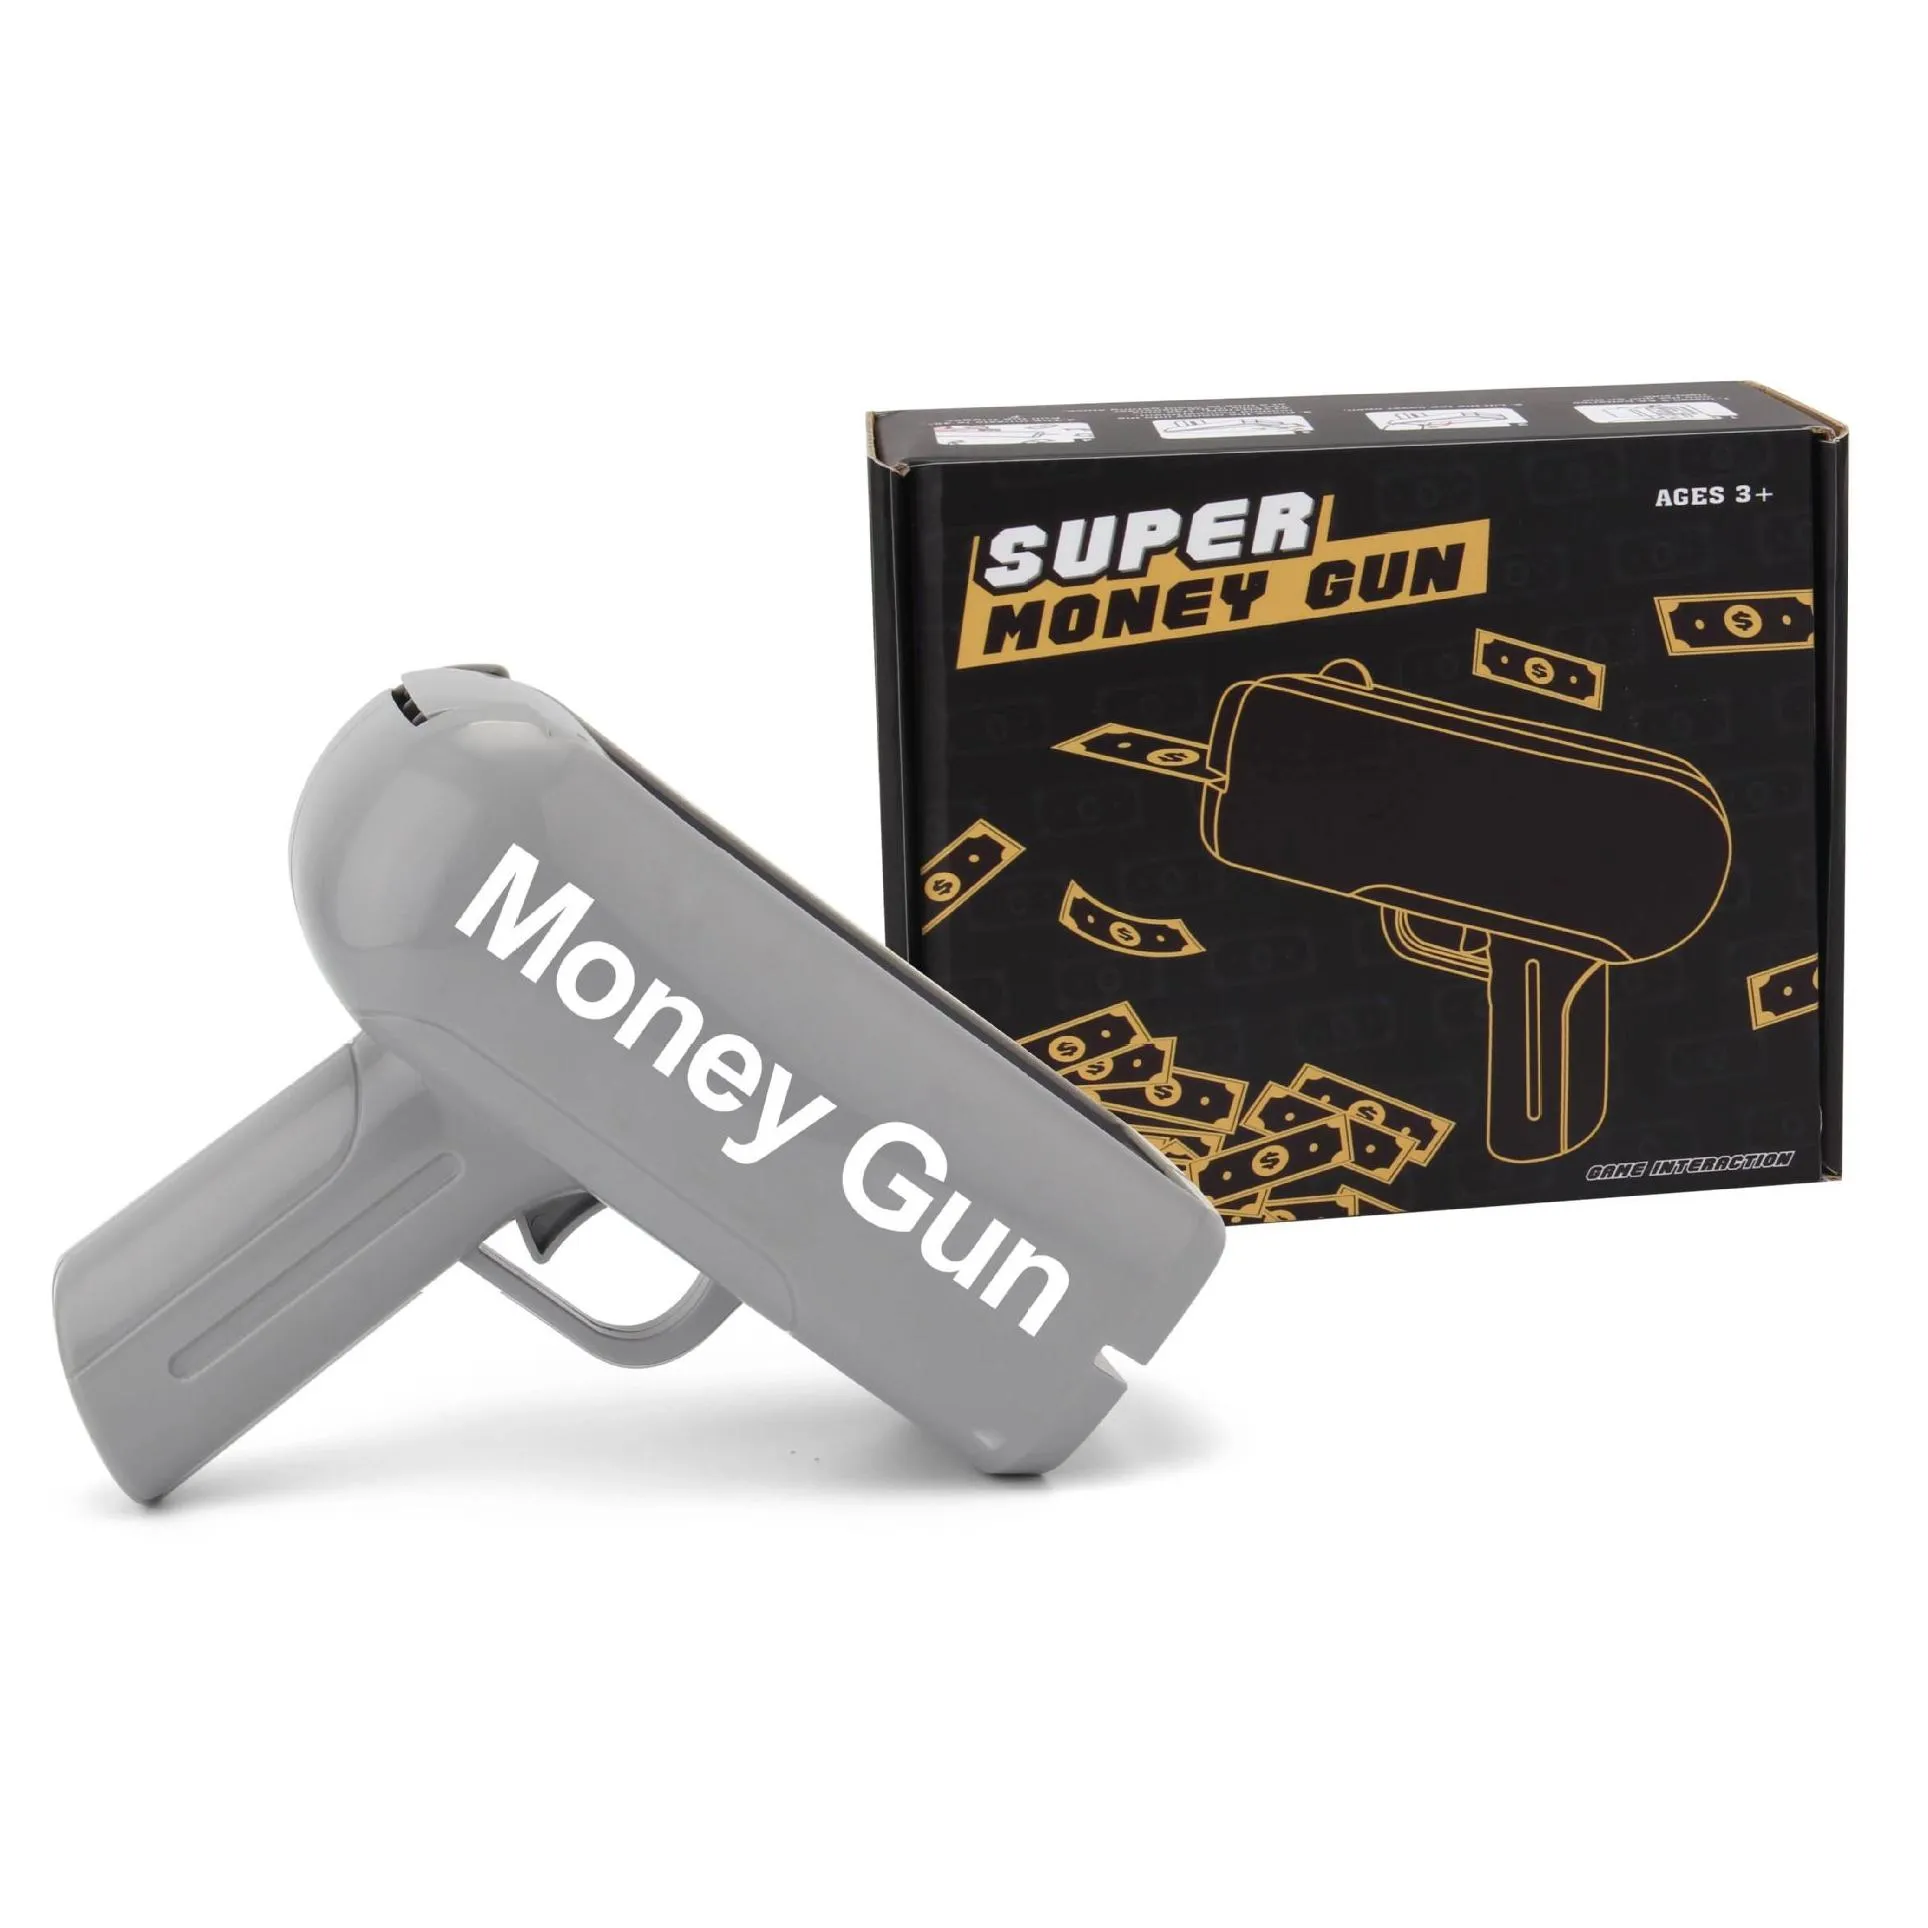 Gun Toys Power Enhanced Version Spray Money Two Generation Dollar Prop Toy Spit T230207 Drop Delivery Gifts Model Dhgys